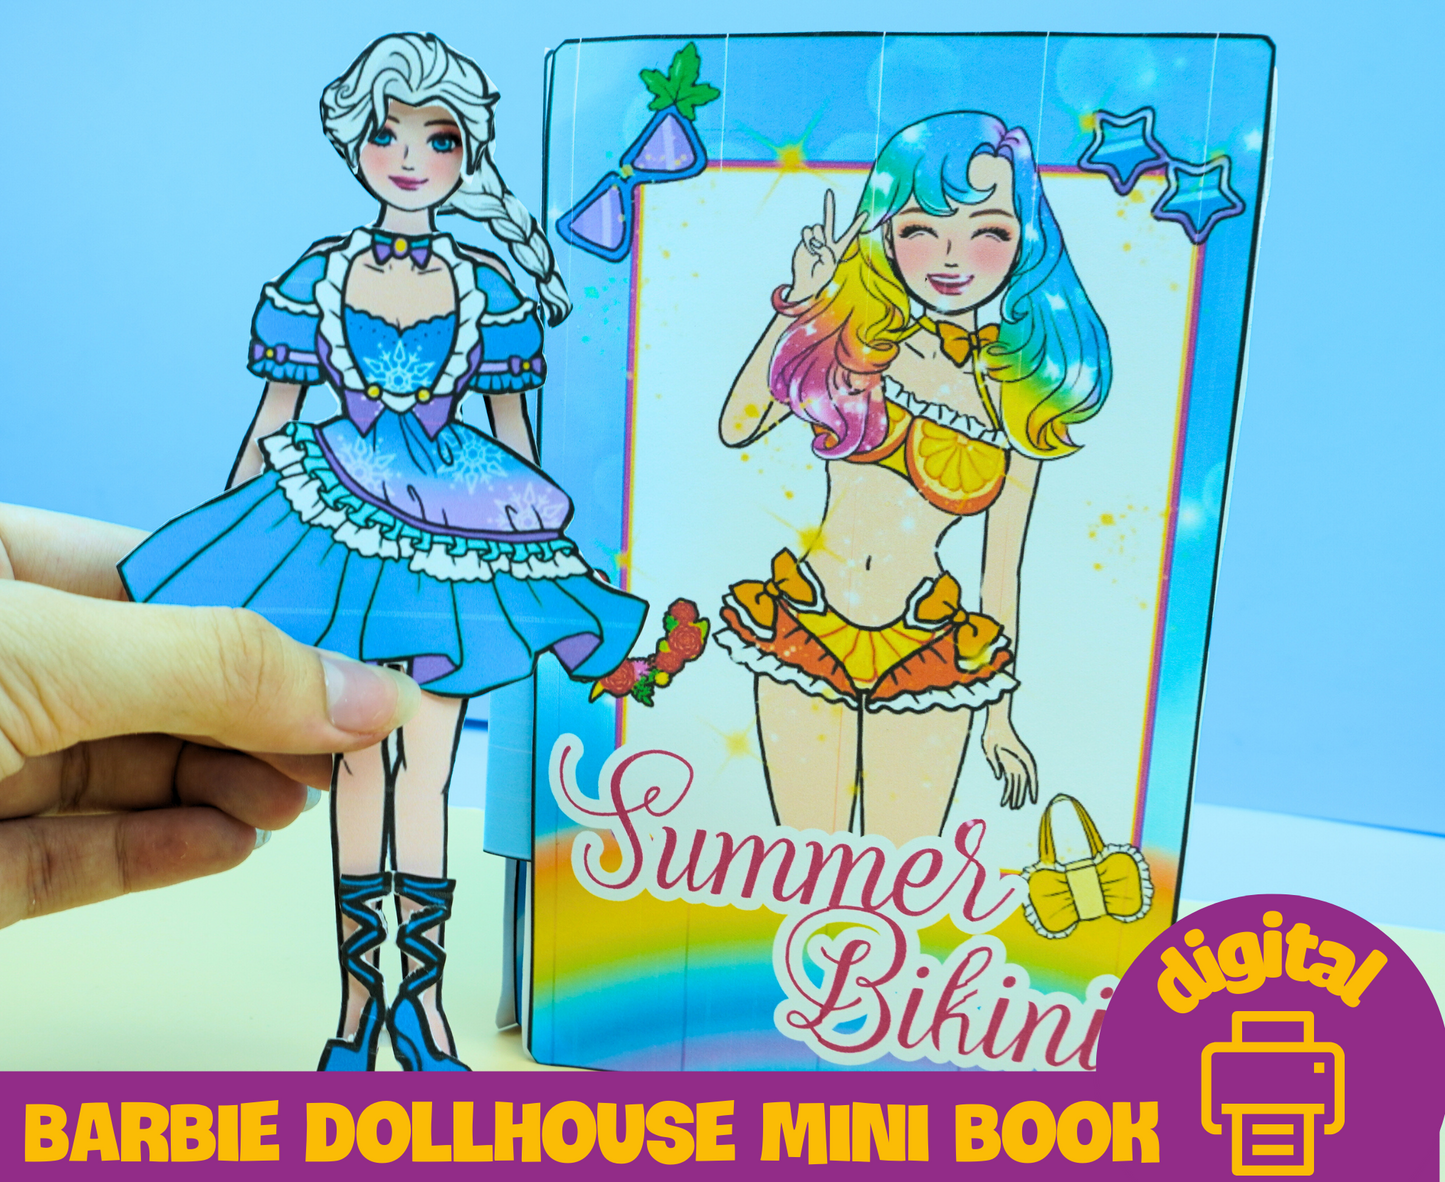 Bikini Summer barbie outfits printables ☀️Summer barbie doll clothes | Activity book go to the beach printables🌈Activity book montessori toy | Woa Doll Crafts